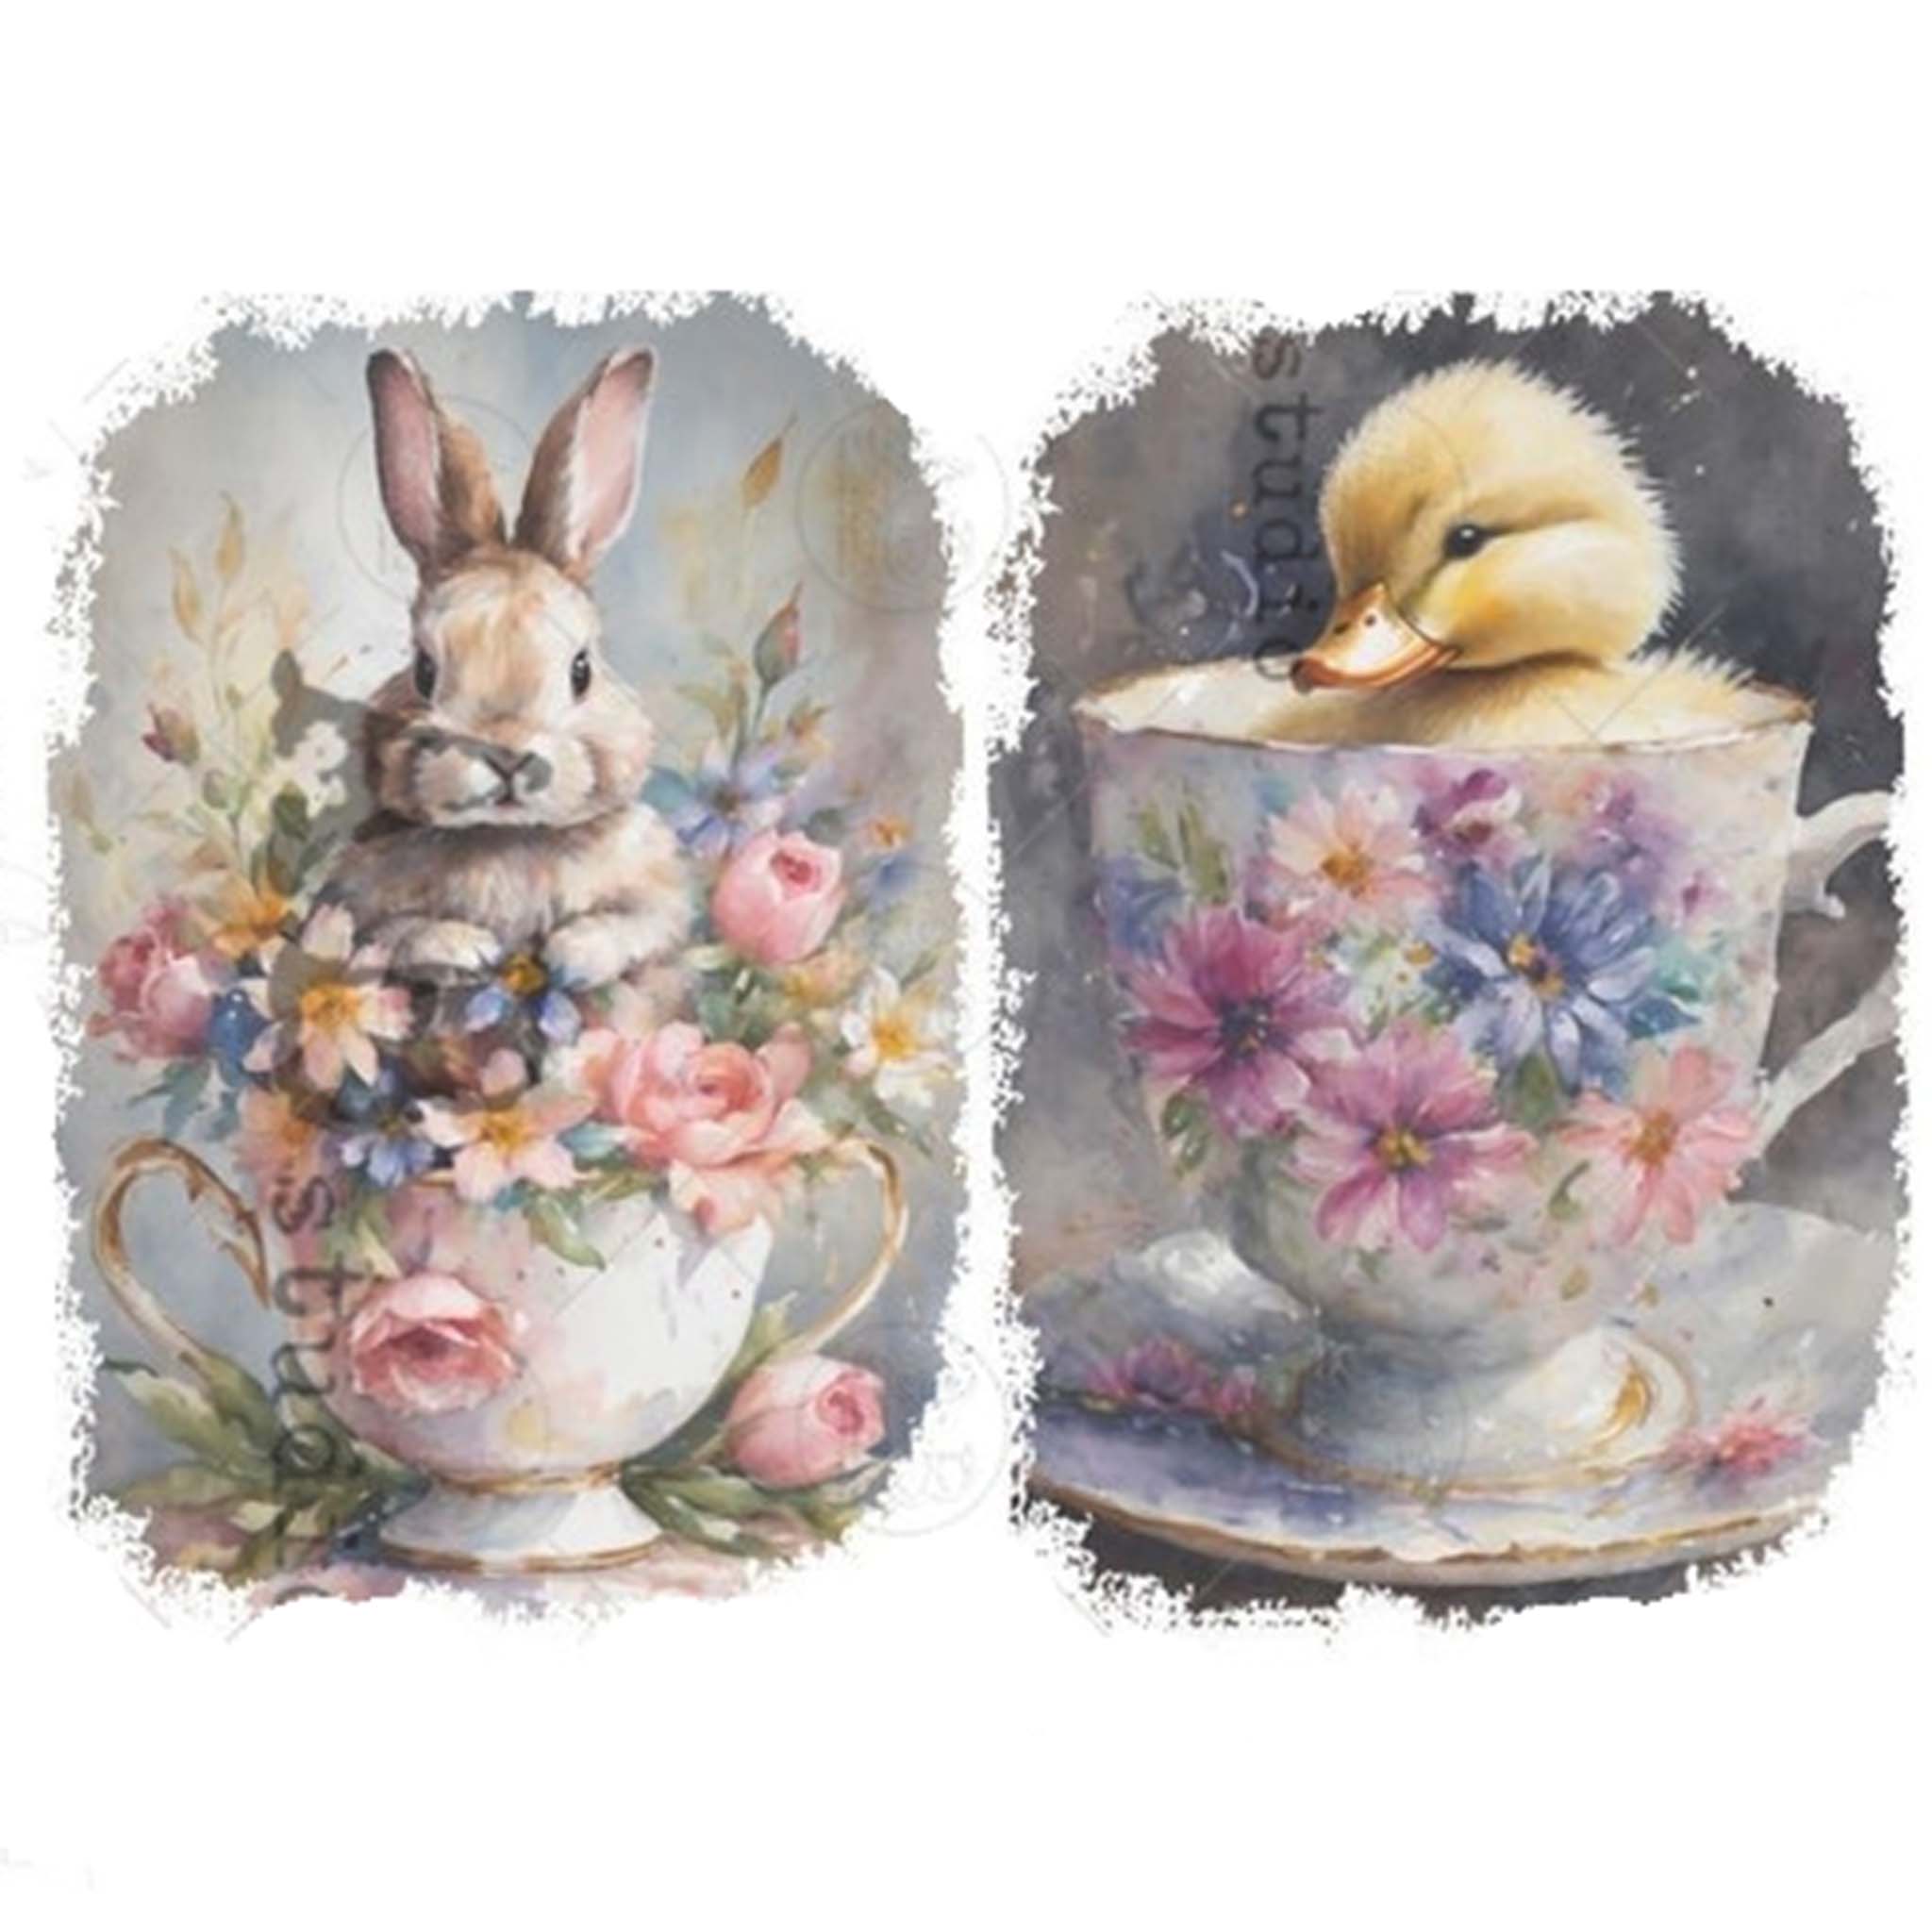 A4 rice paper designs that features two charming designs - a bunny and a duckling in teacups, with lovely flower details are against a white background.